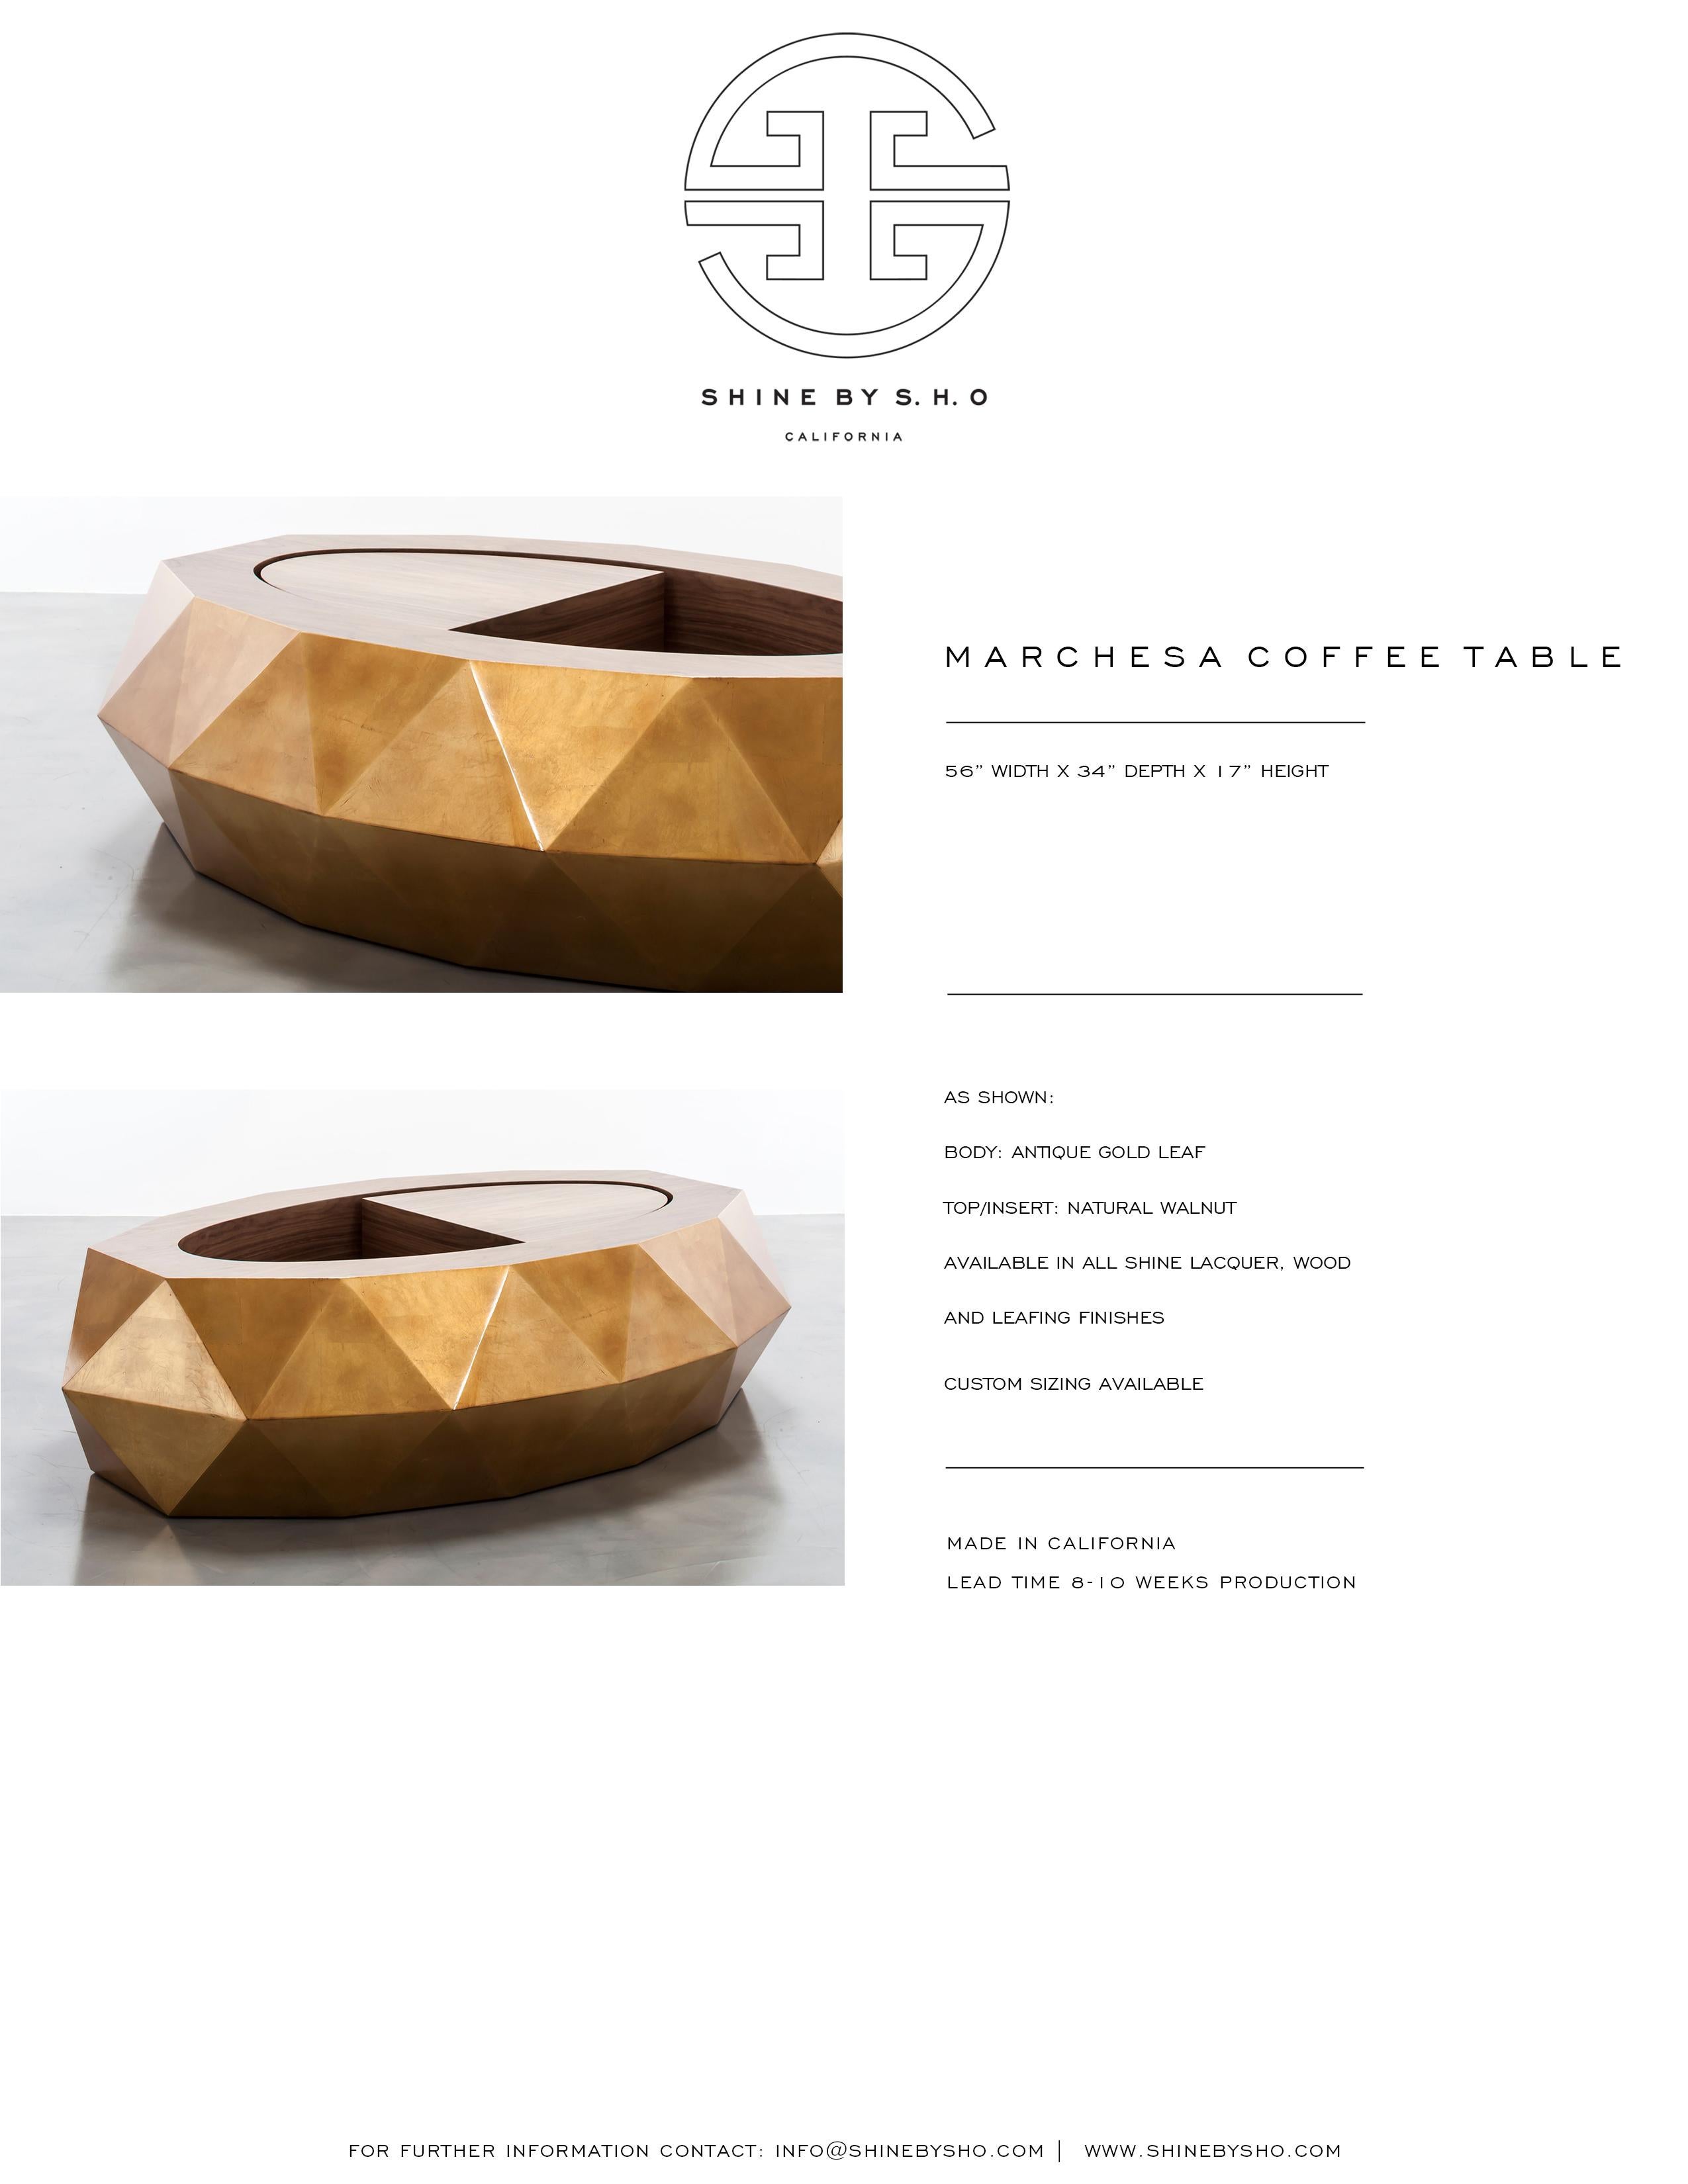 MARCHESA COFFEE TABLE - Modern Faceted Gold Leaf and Walnut Coffee Table In New Condition For Sale In Laguna Niguel, CA